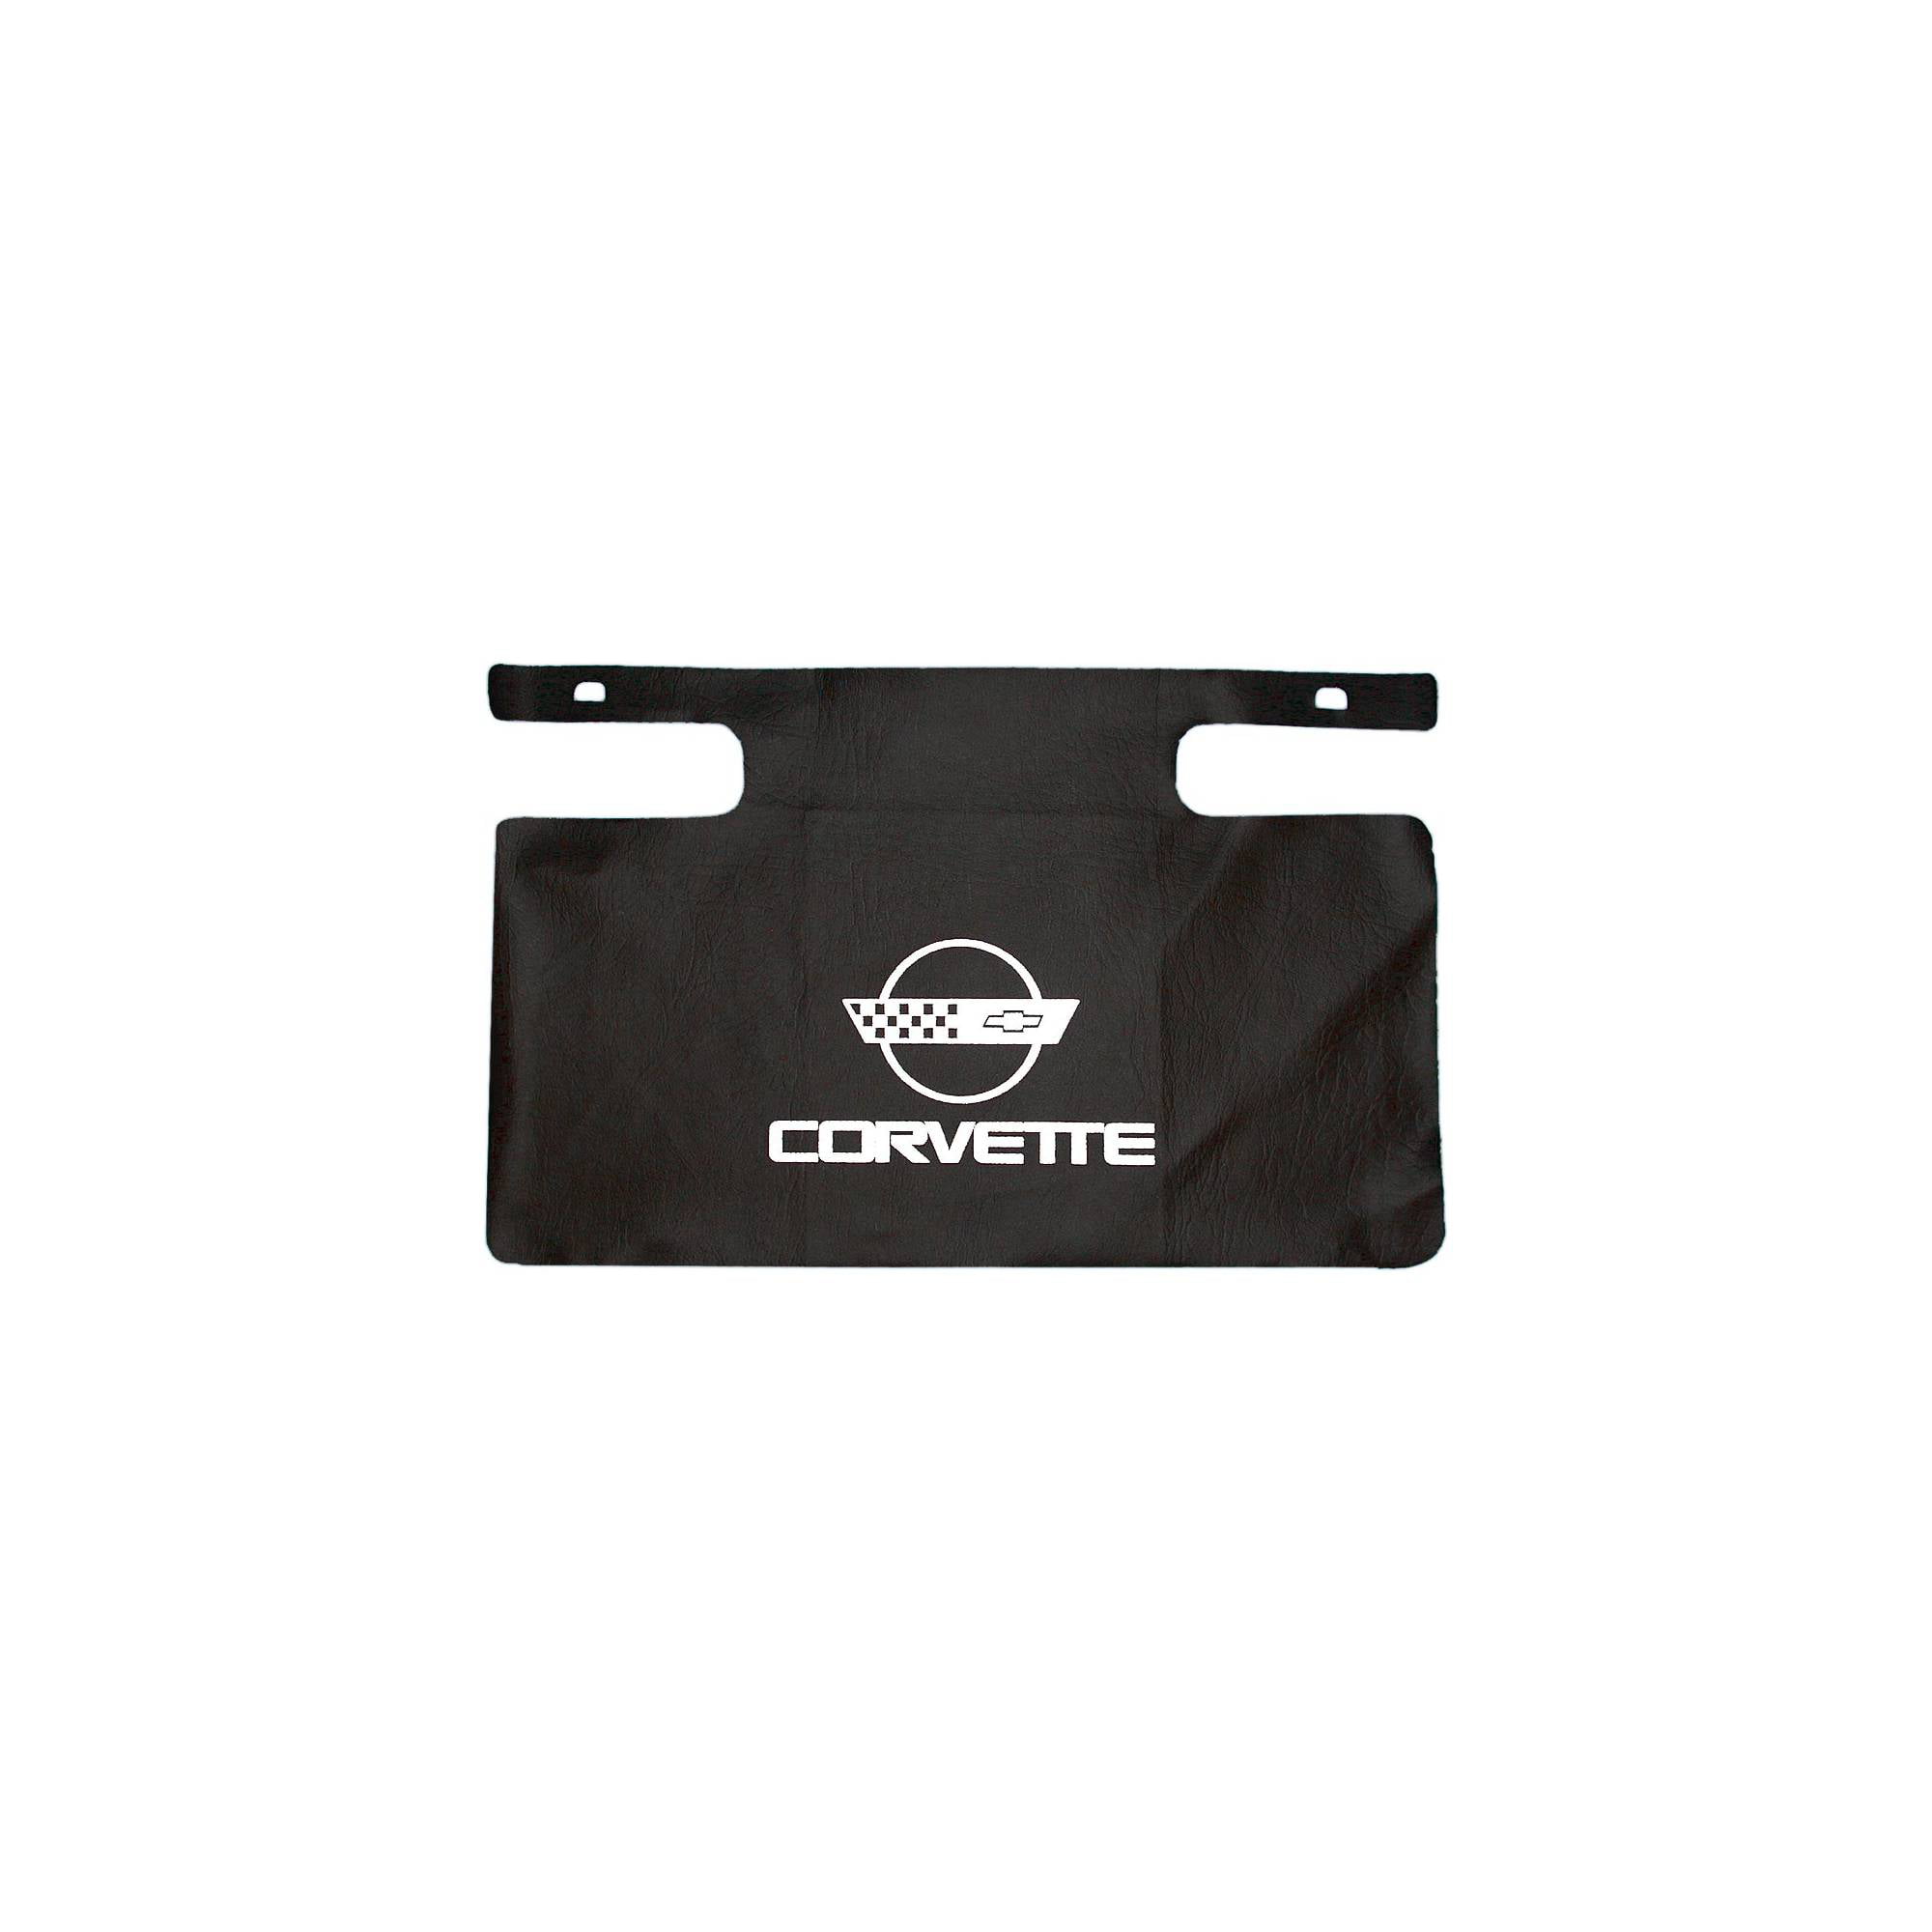 Ecklers Premier Quality Products 25-114277 Corvette Gas Filler Paint Protector With White Emblem 